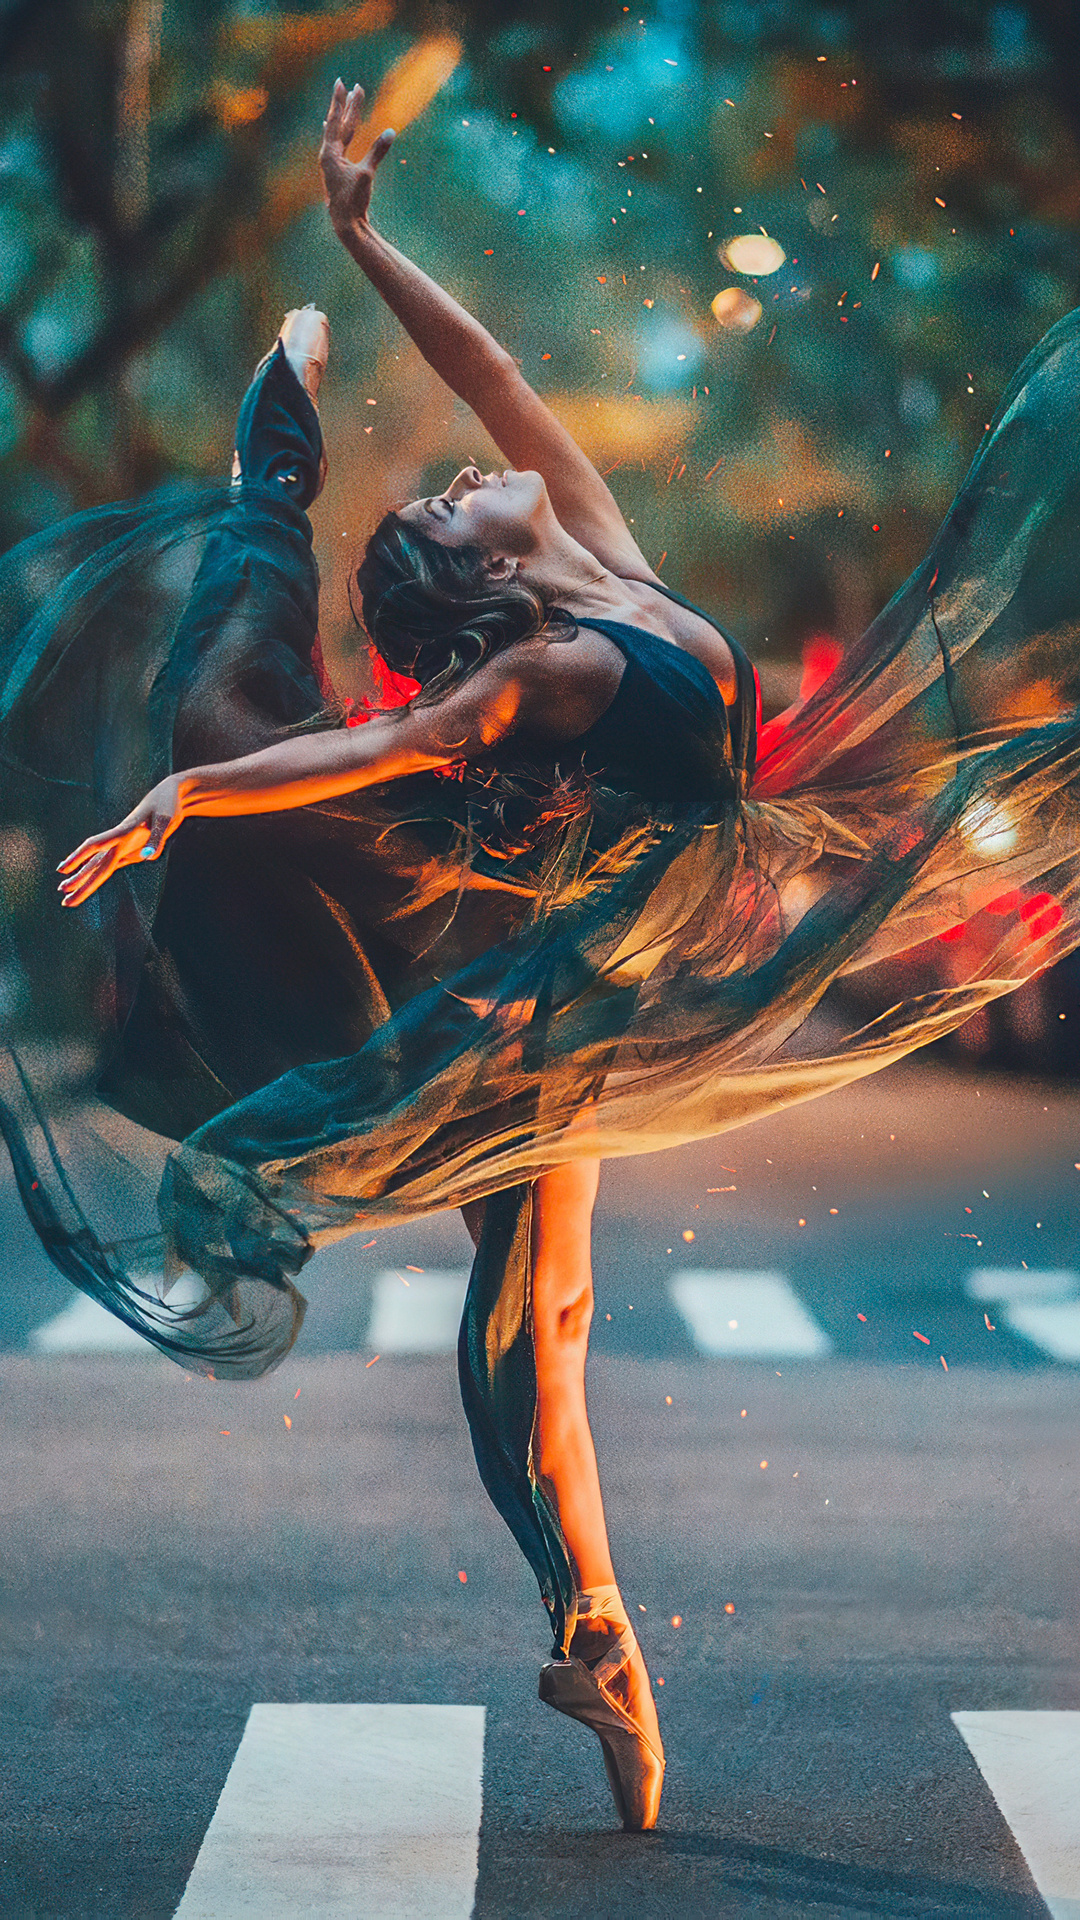 Dancing on the road, Ballet dancers in 4K, iPhone wallpaper, Captivating imagery, 1080x1920 Full HD Handy